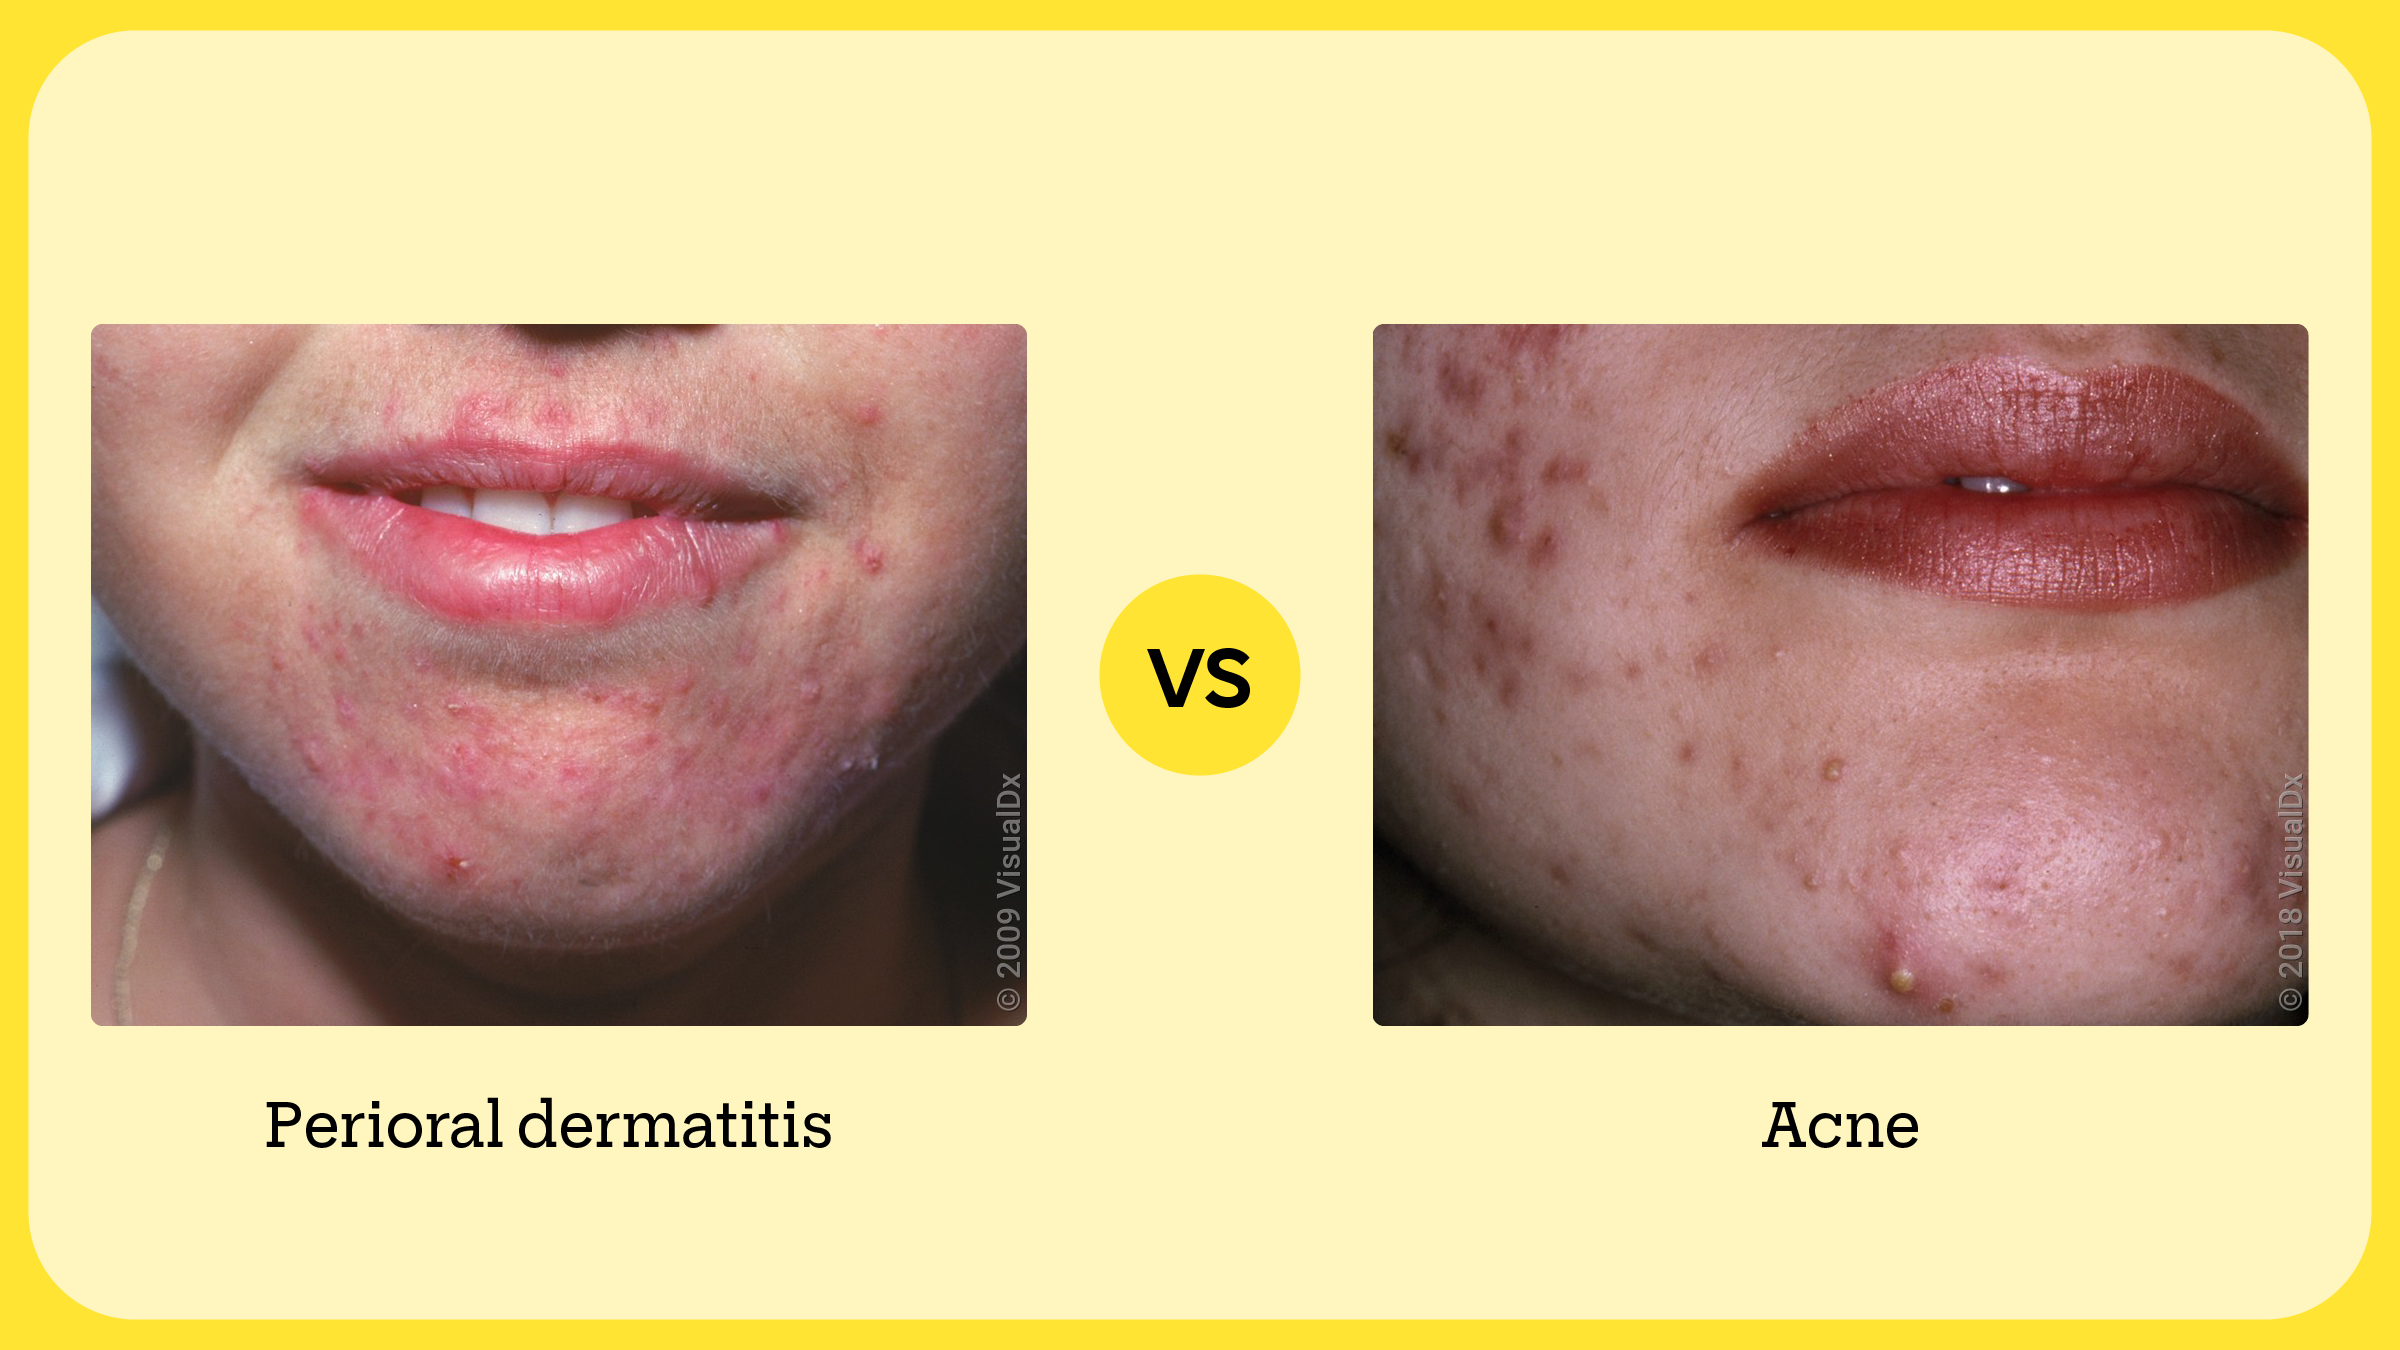 Left: Pink and red bumps around the mouth in perioral dermatitis. Right: Red pimples and comedones on the cheek and chin in acne.